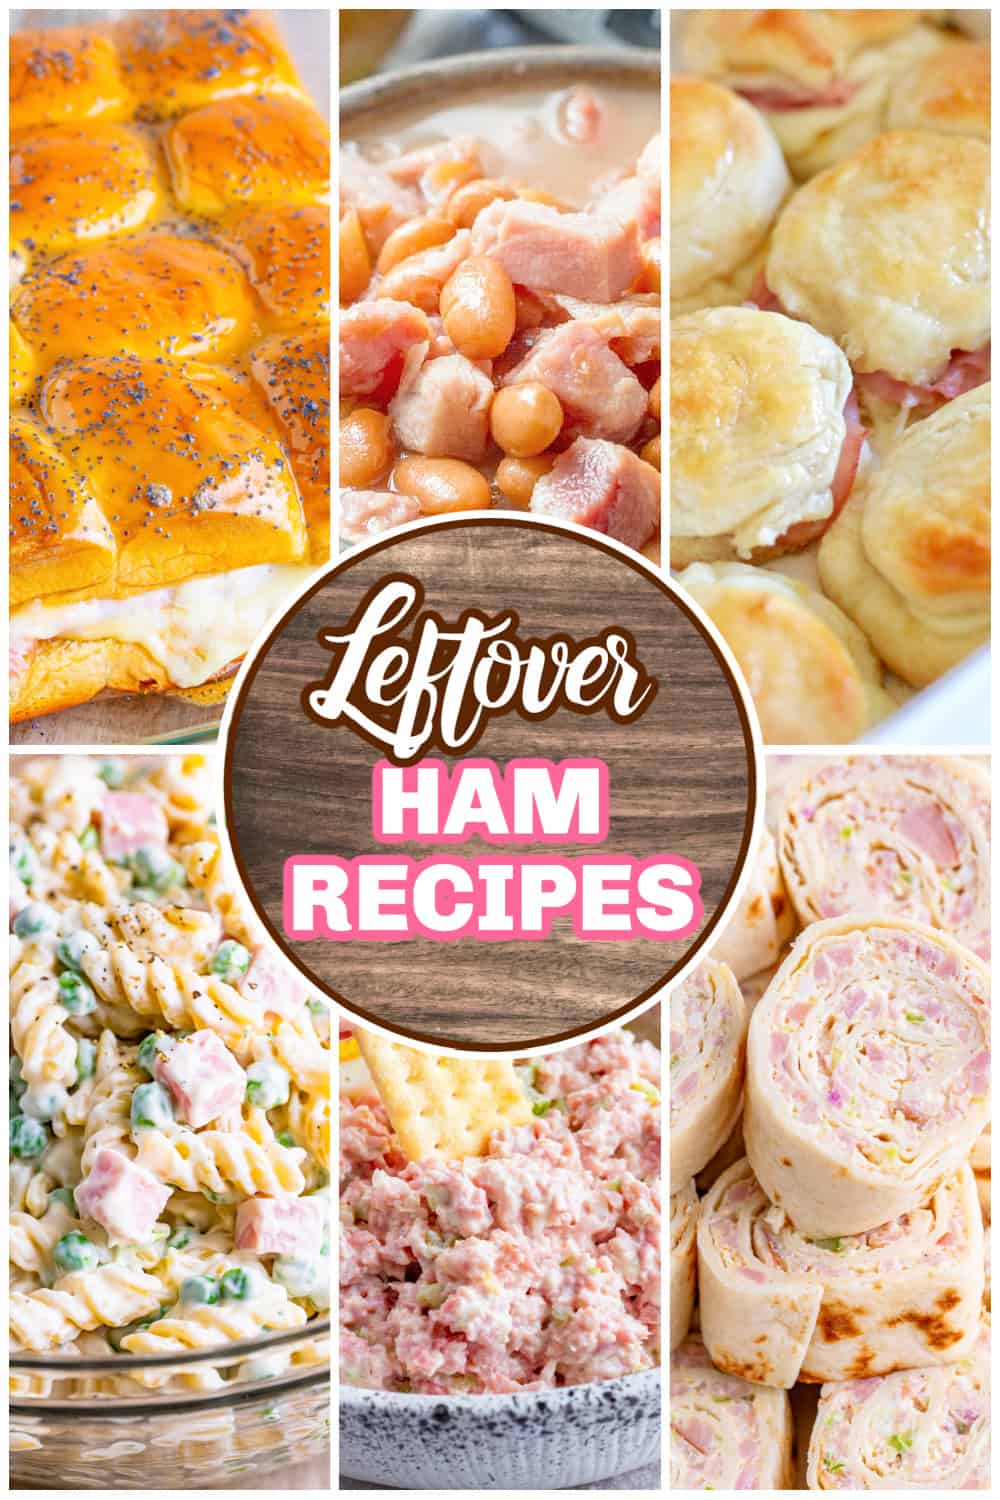 a collage of 6 photos featuring ham recipes with text on the collage that says "Leftover Ham Recipes". 